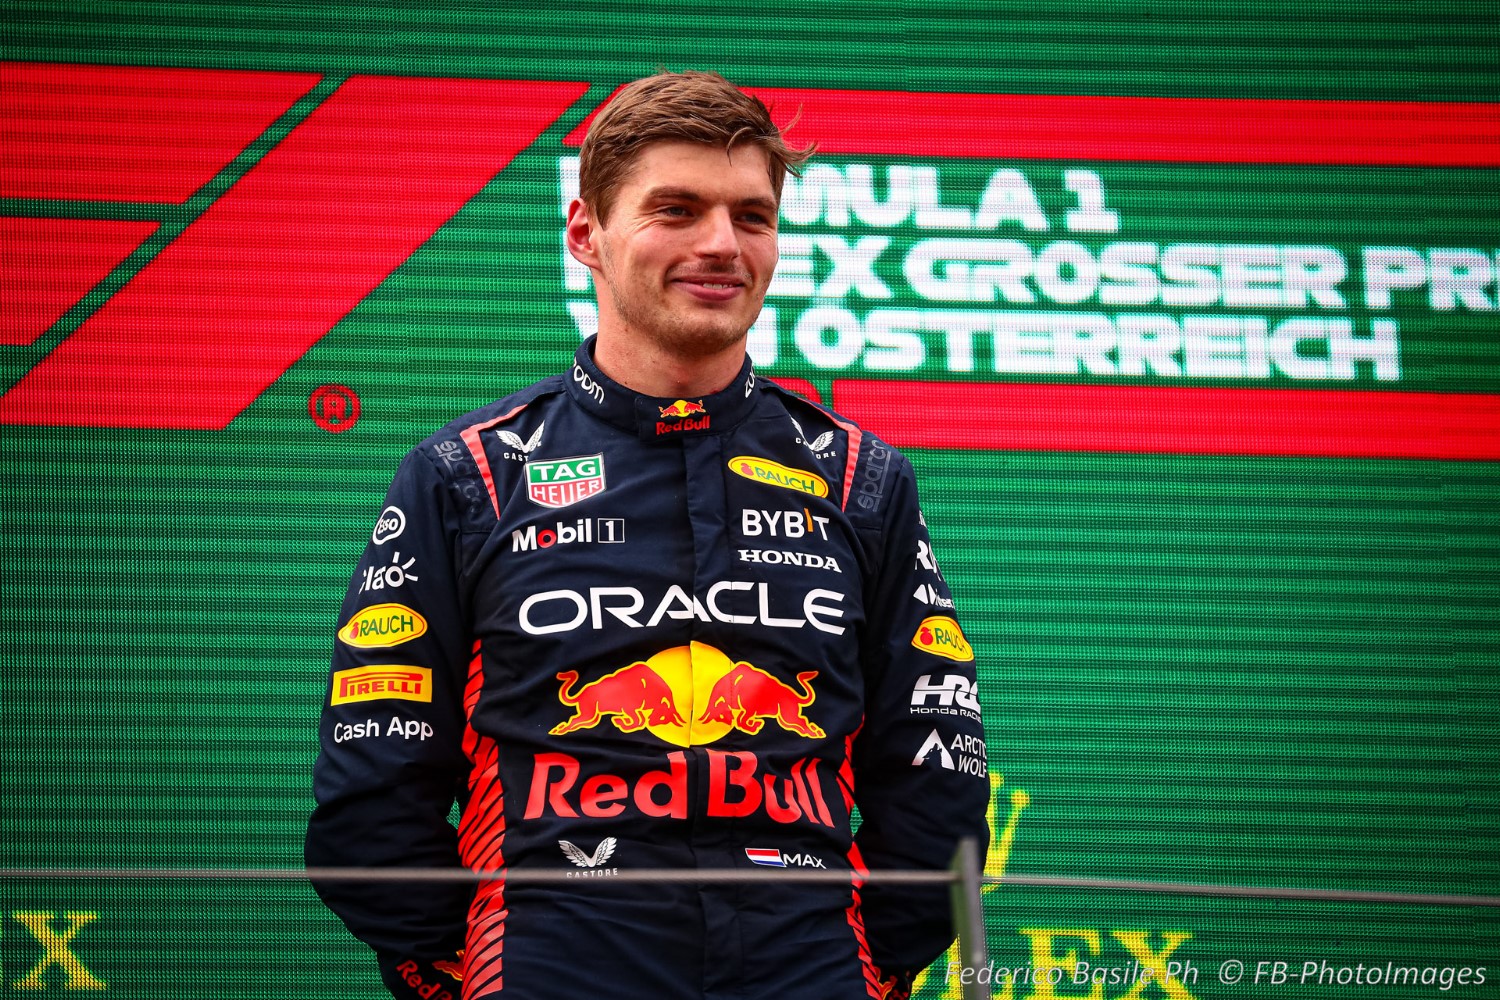 #1 Max Verstappen (NED) Red Bull Racing Honda on the podium during the Austrian GP, Spielberg 29 June-2 July 2023 at the Red Bull Ring, Formula 1 World championship 2023.